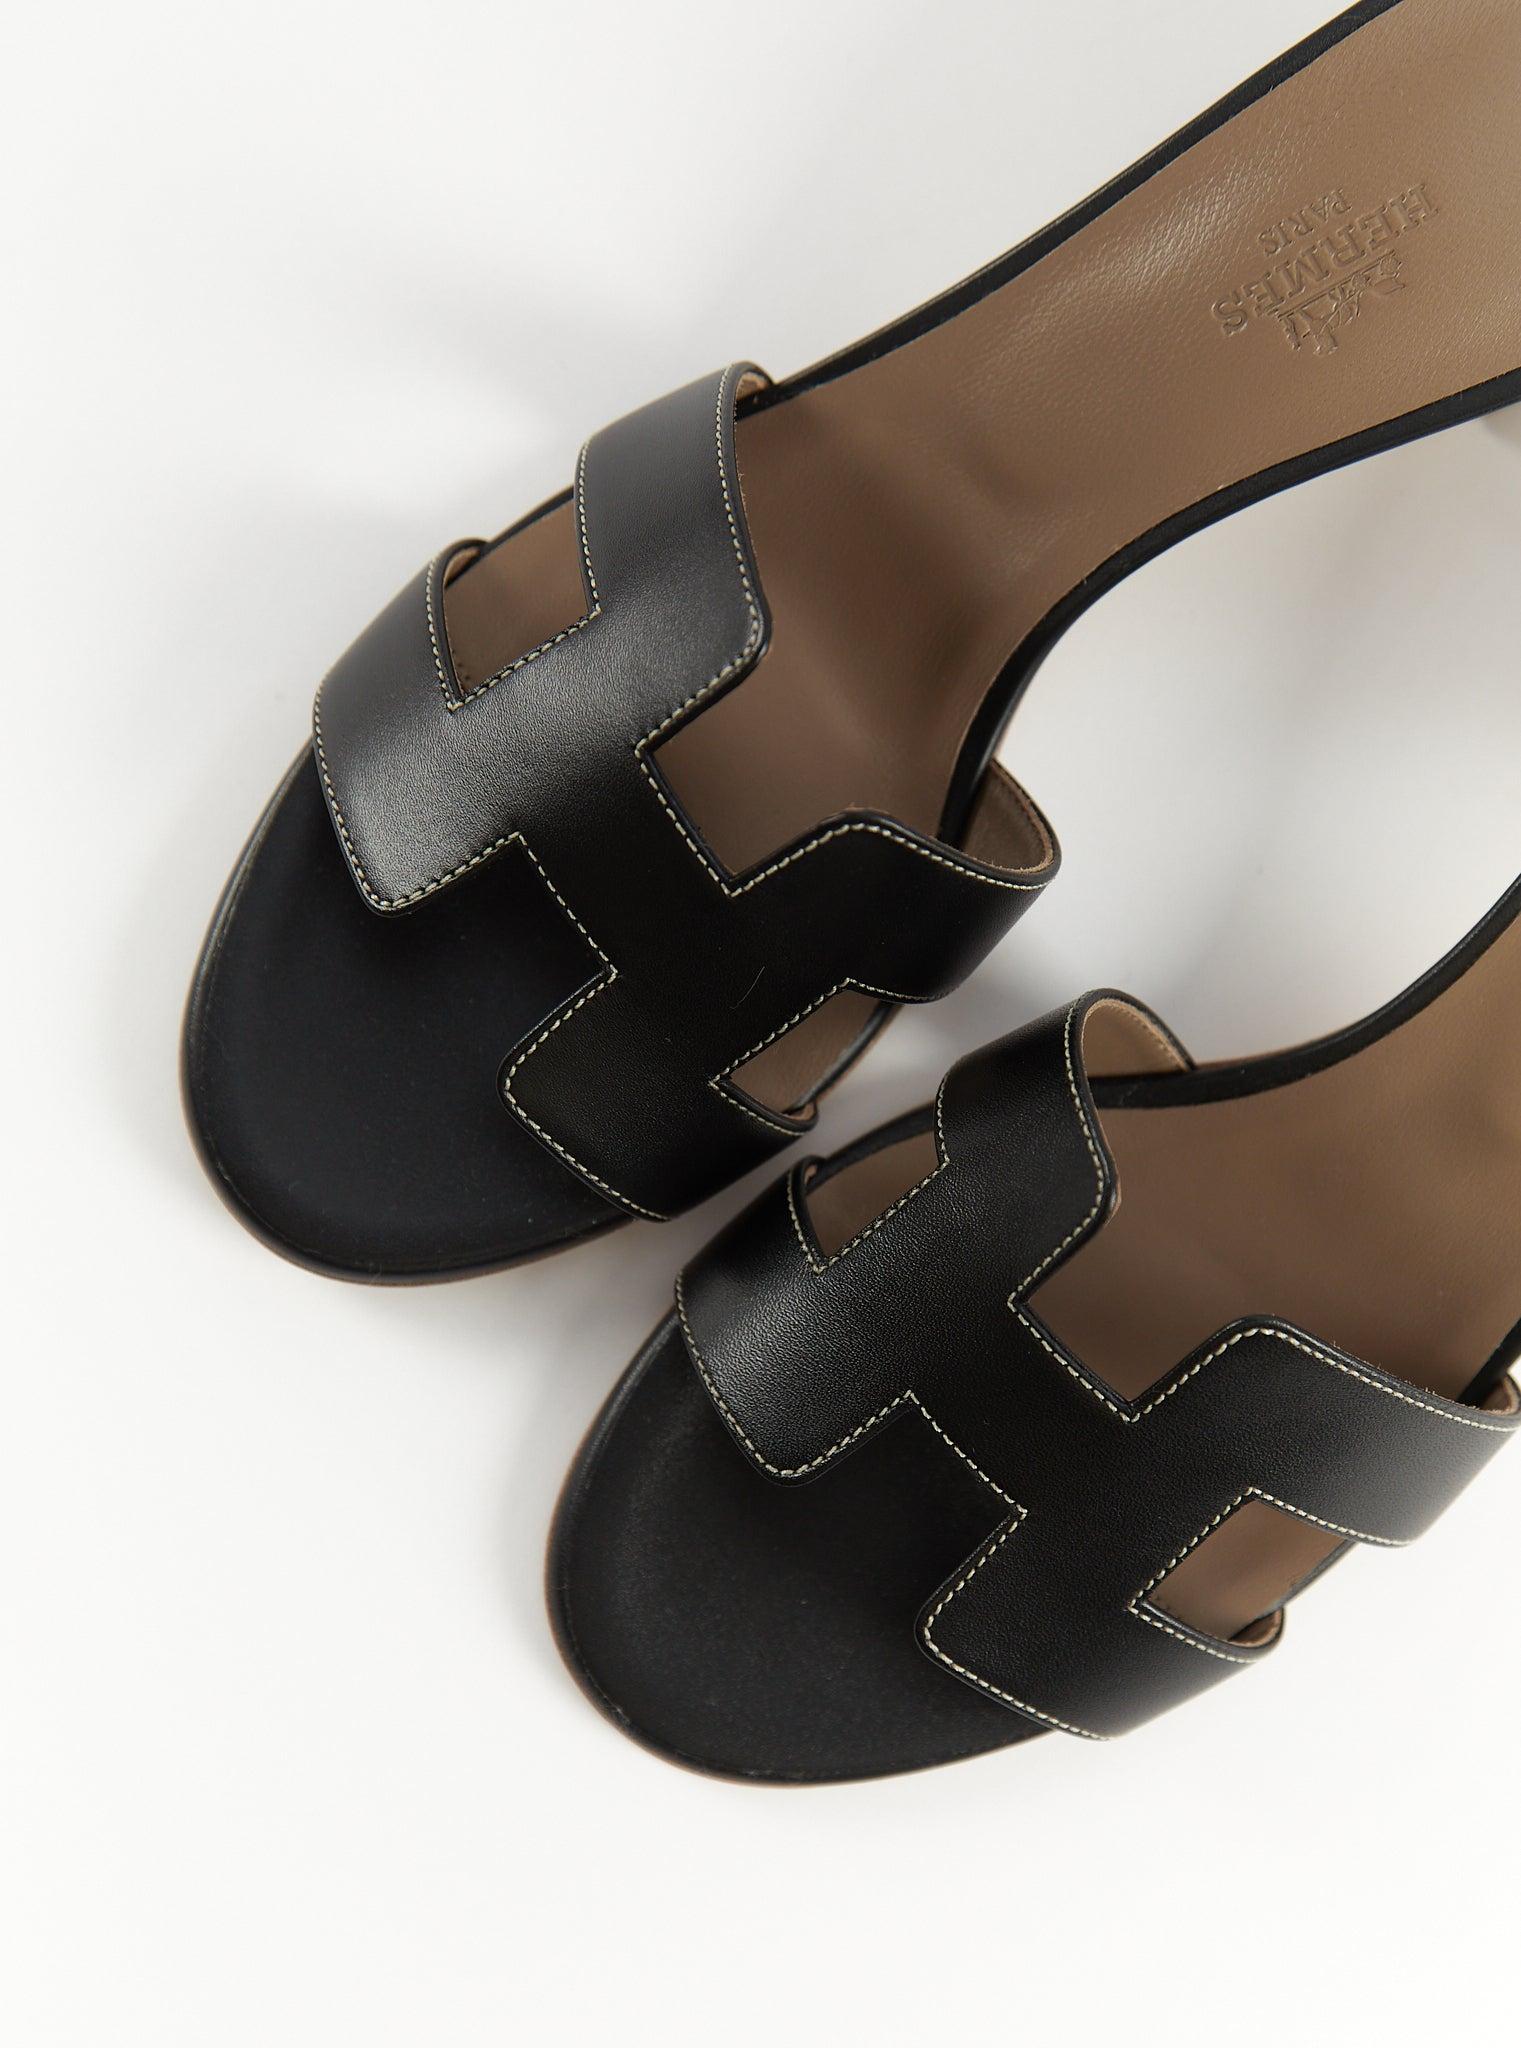 HERMÈS OASIS SANDAL Black - Size 38.5 In Excellent Condition For Sale In London, GB